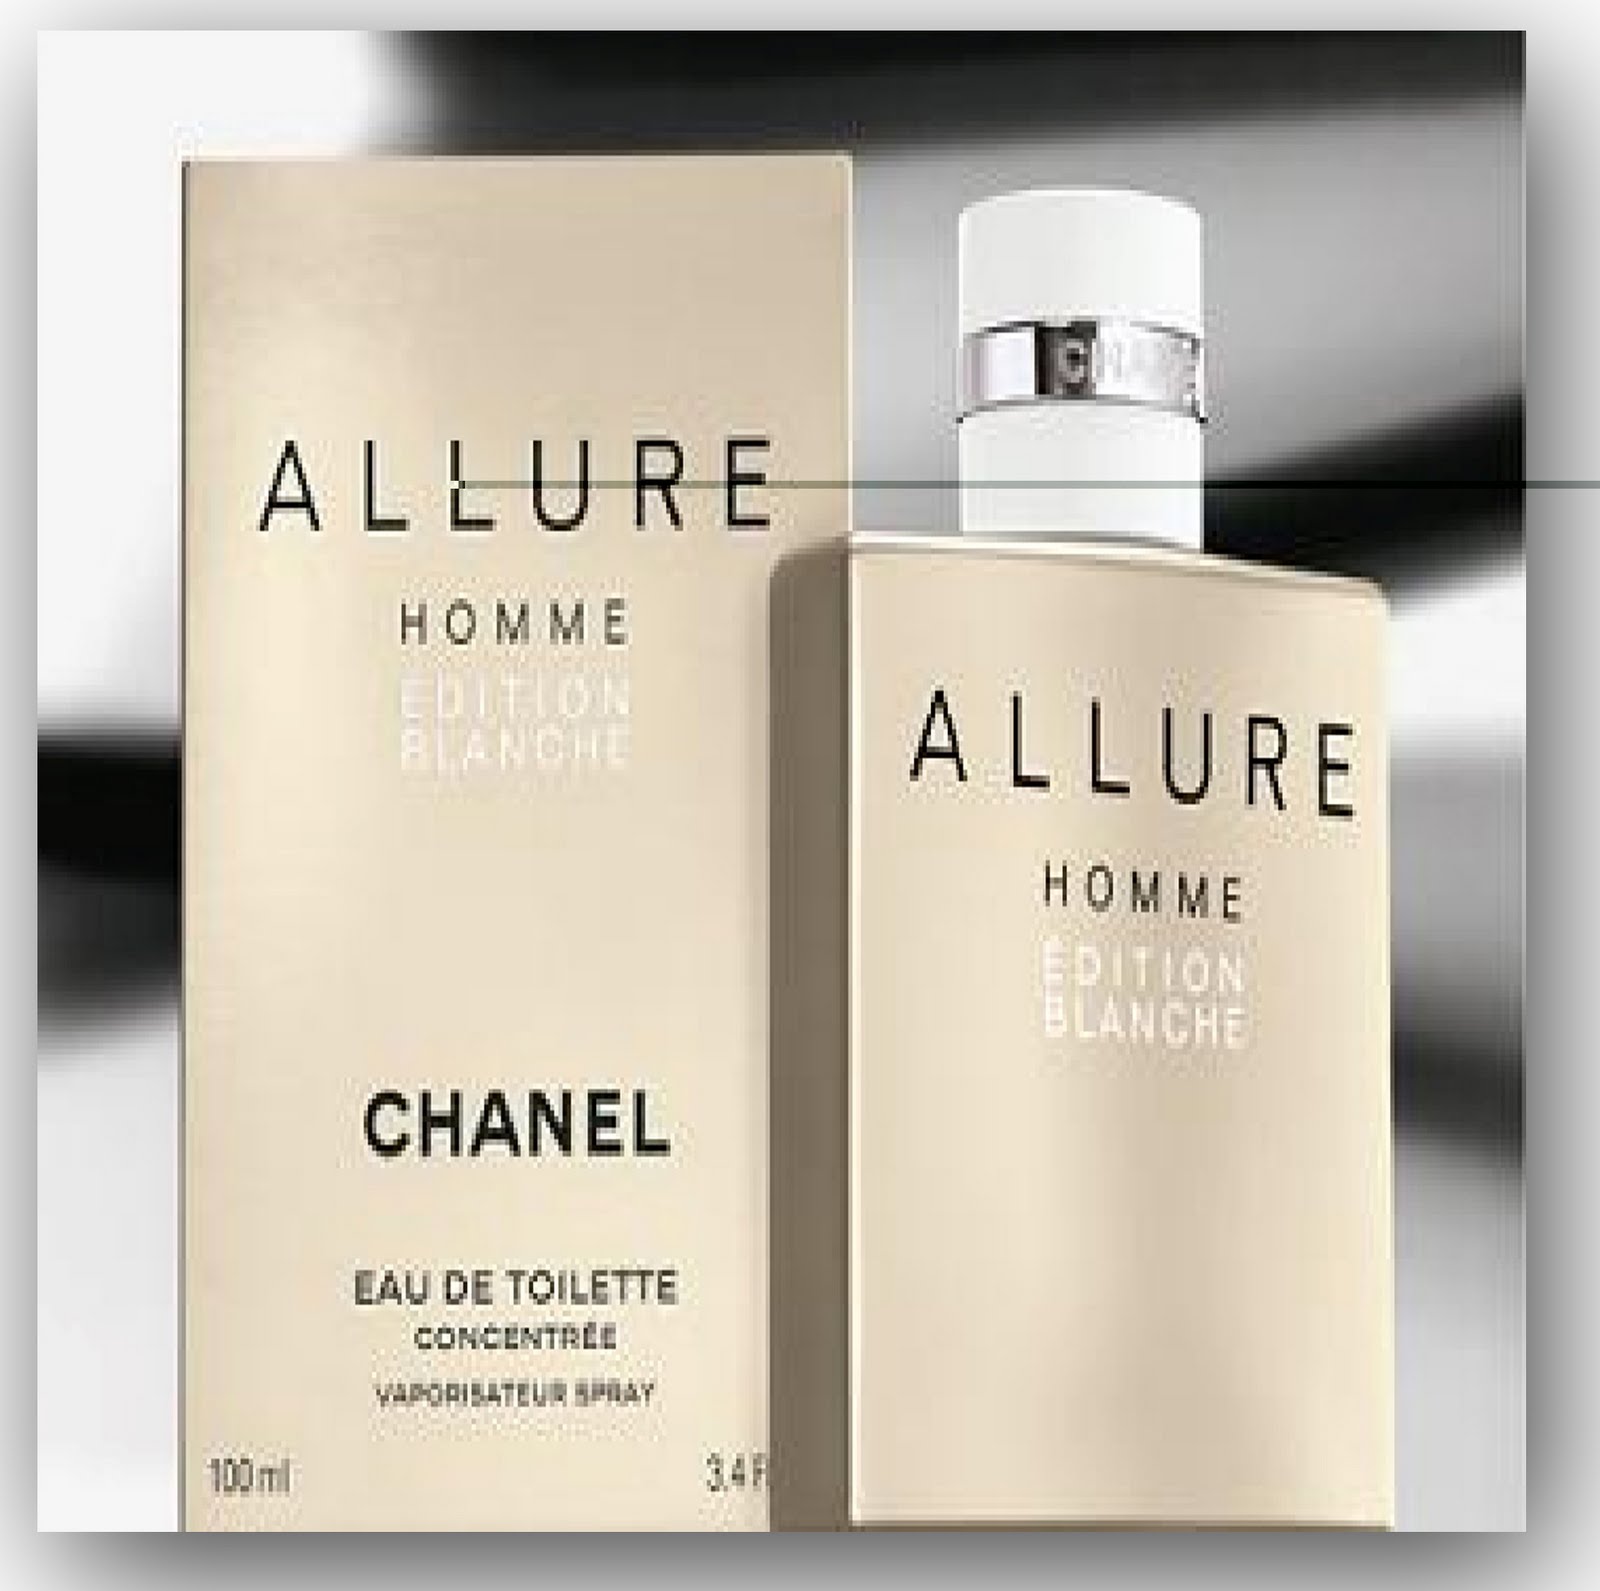 Chanel homme edition blanche. Chanel Allure homme Edition Blanche 100ml. Chanel Allure Edition Blanche men 50ml EDP. Chanel Allure homme Edition Blanche EDP, 100 ml (Luxe евро). Chanel Allure homme Edition Blanche for men EDP 100ml.